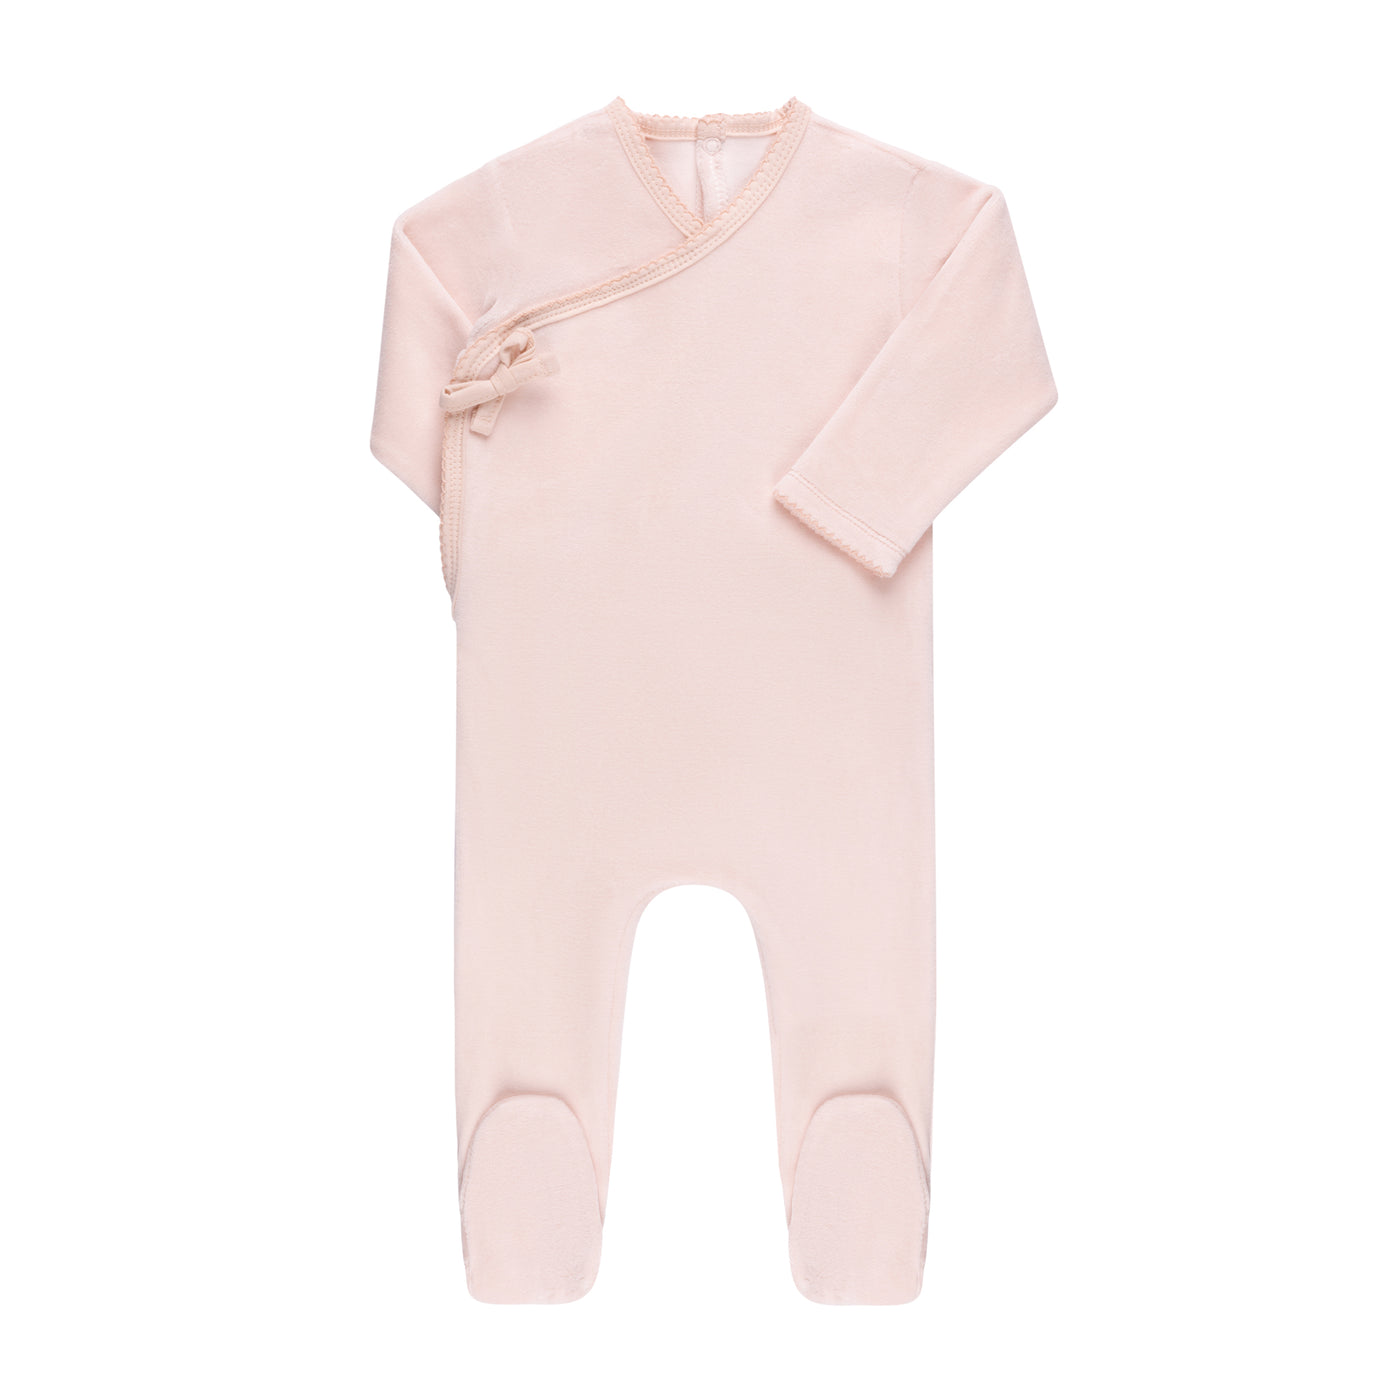 Ely's & Co. Kimono Collection Baby Pink Velour Five Piece Set